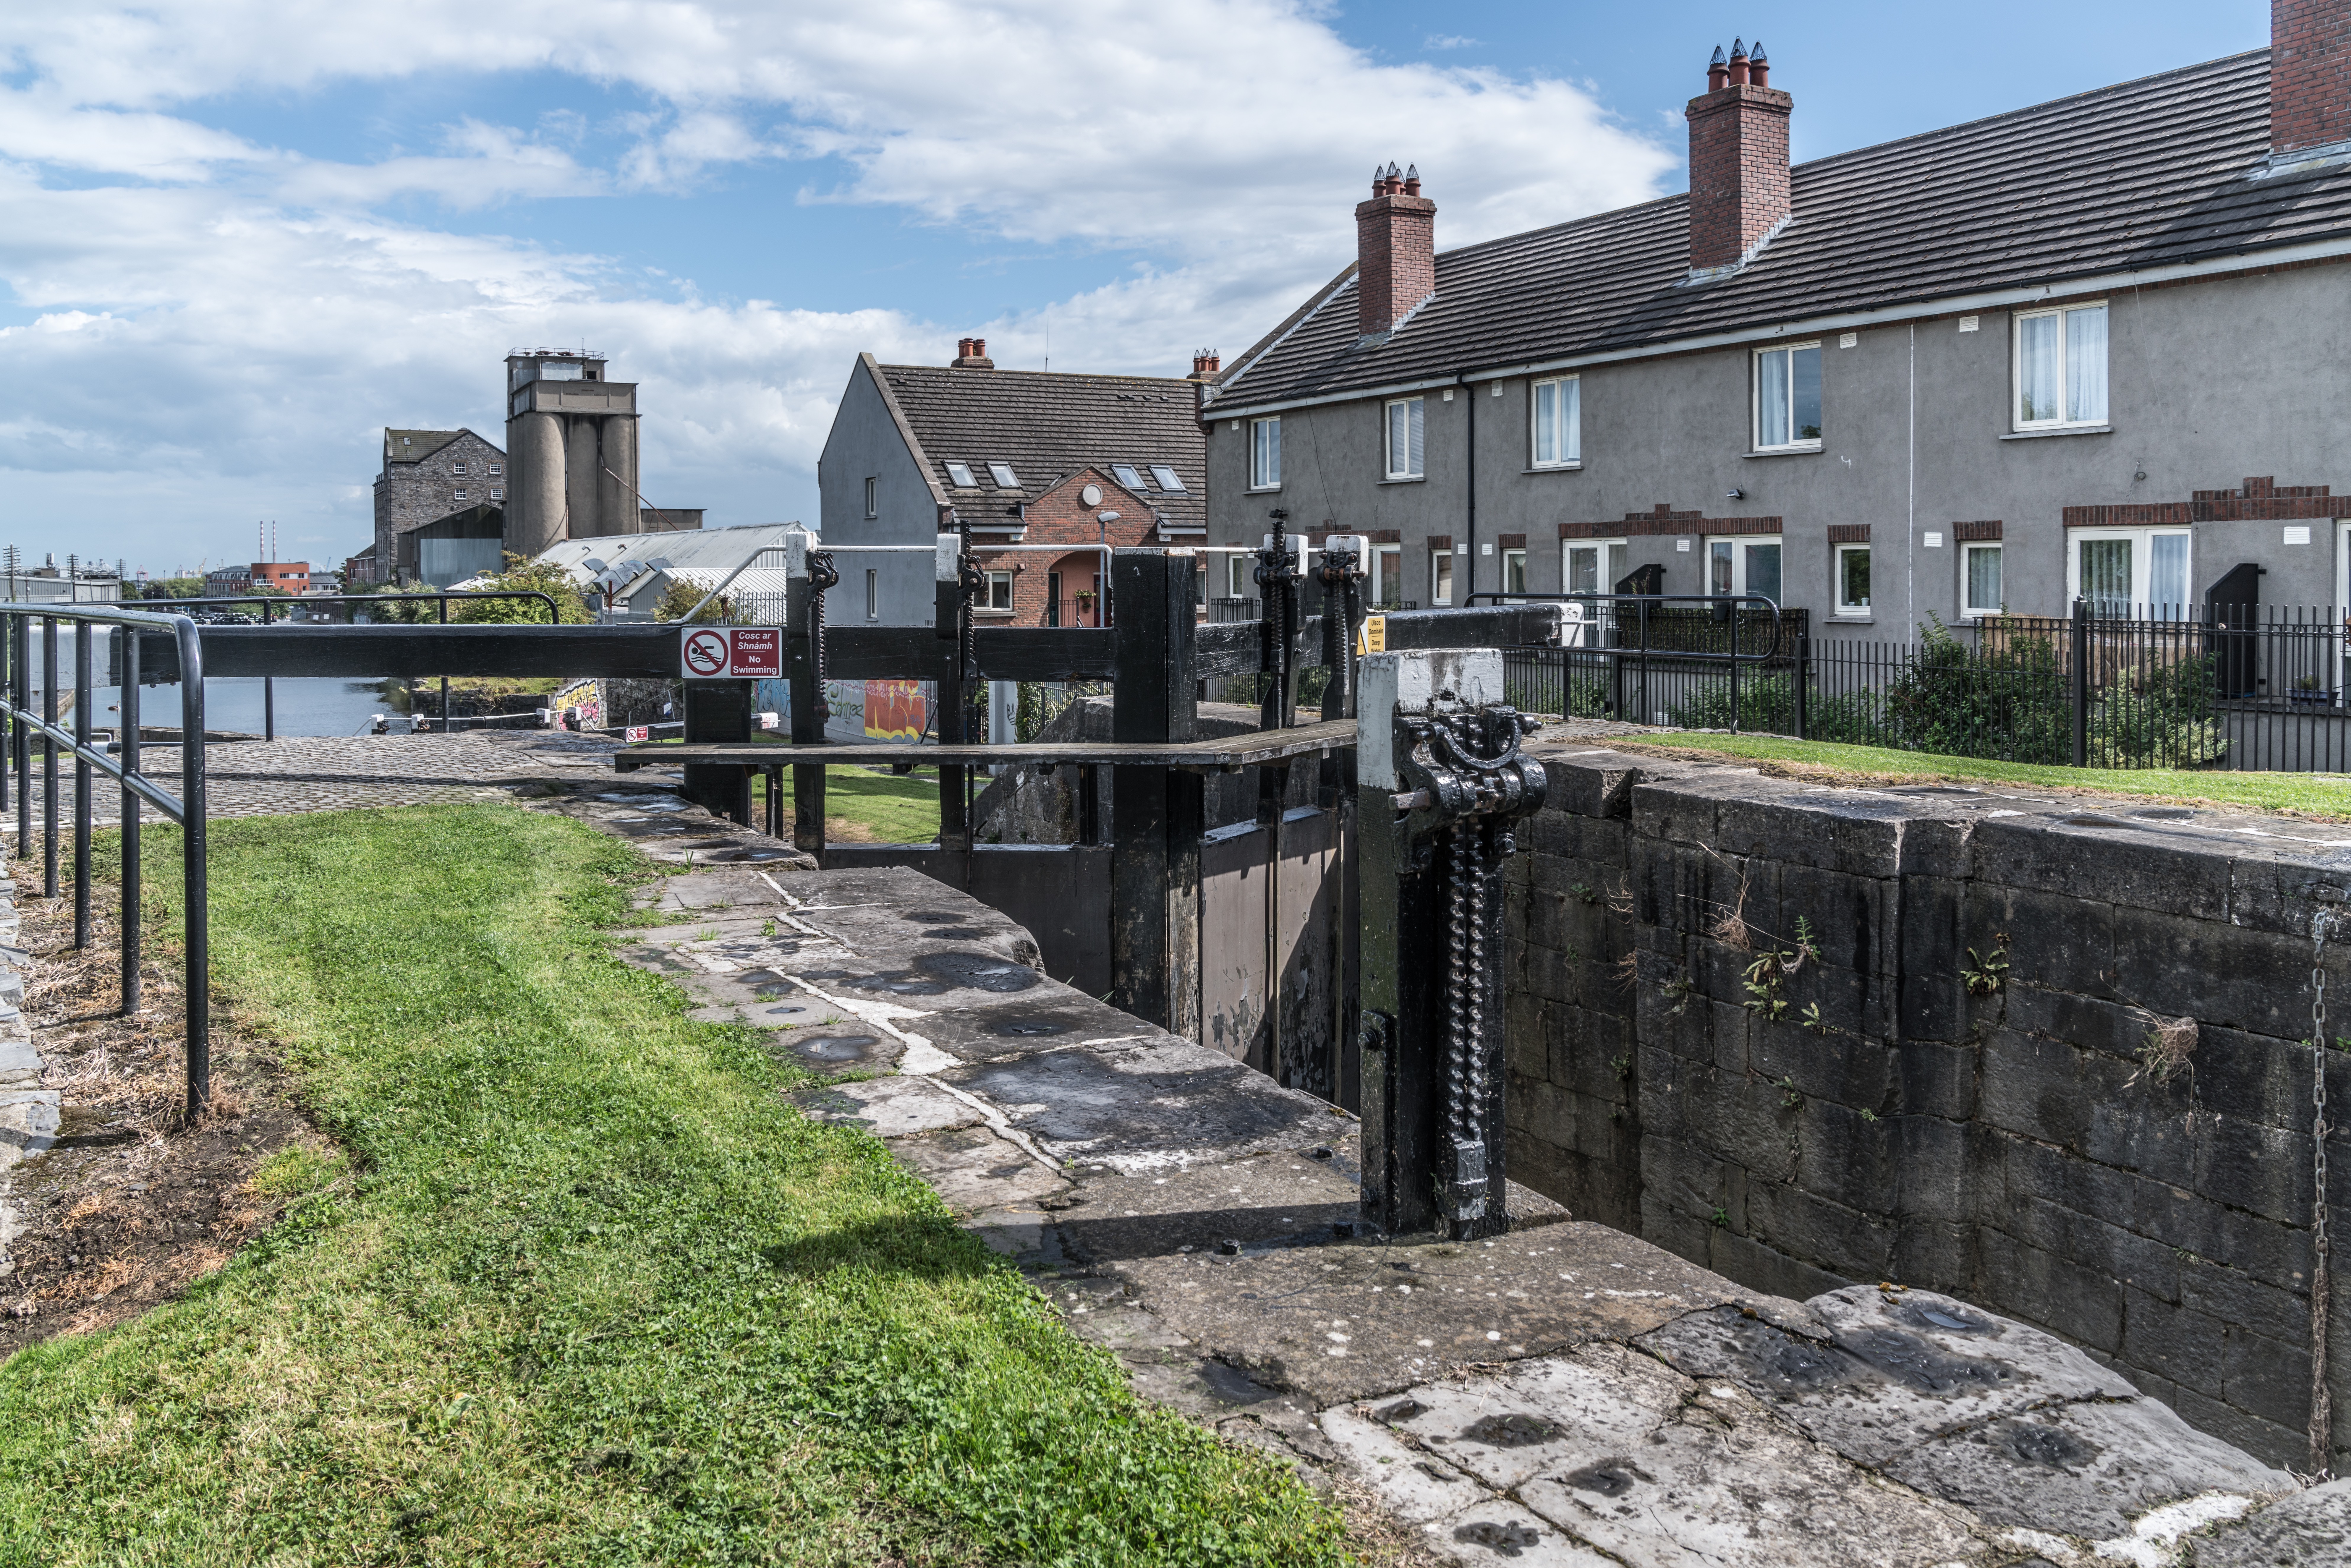  ROYAL CANAL - CABRA AREA 018 